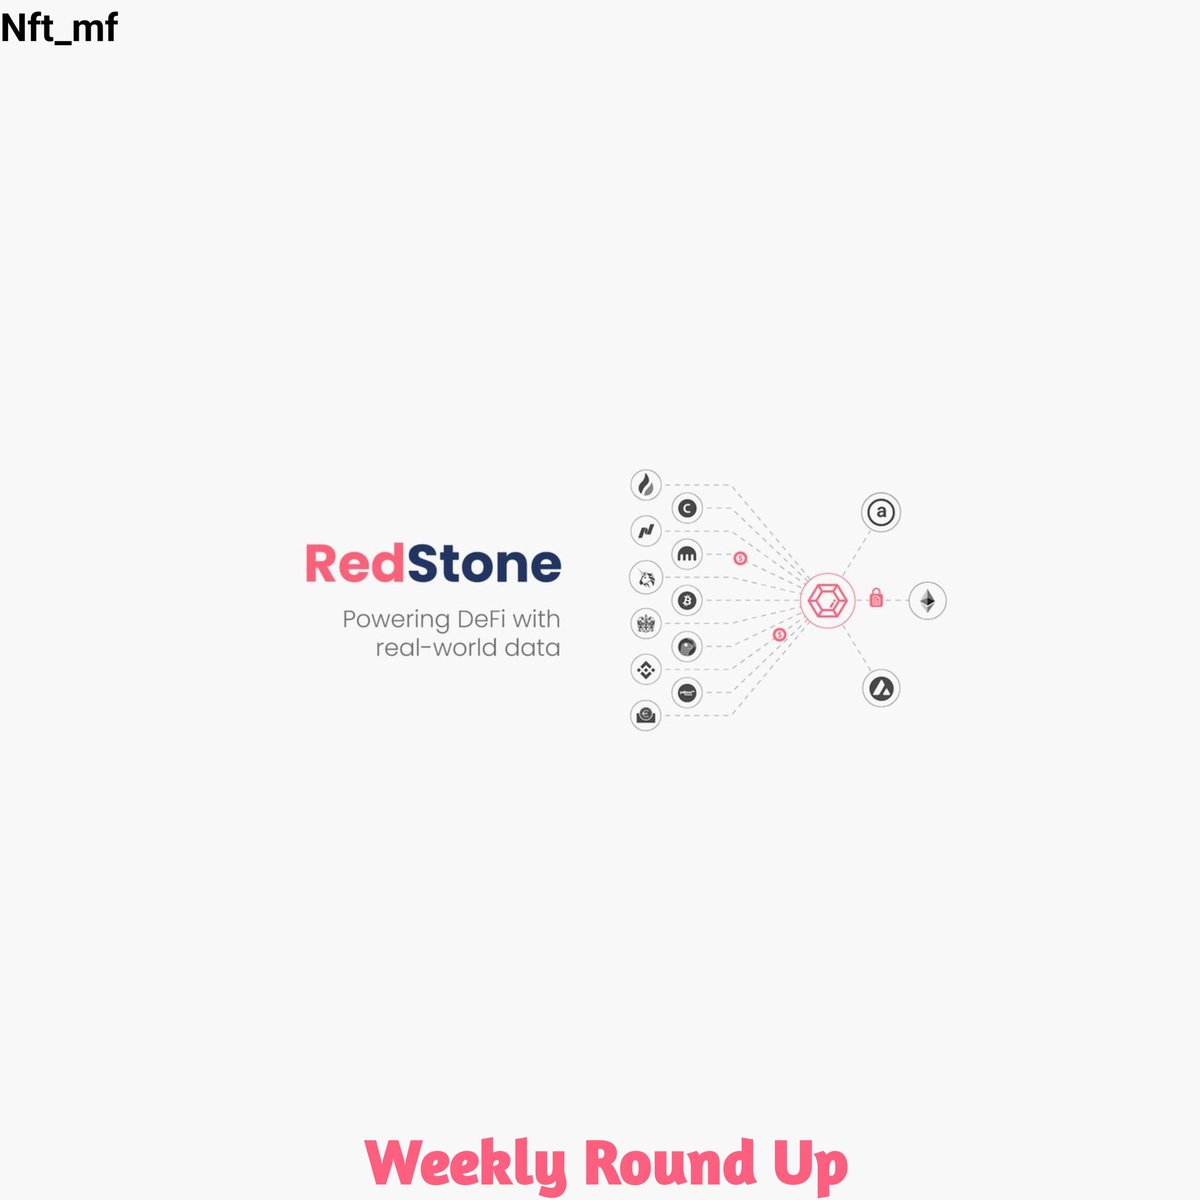 Welcome to a New week miners♦️
Let's explore how RedStone's previous week was ⛏️♦️

#WeeklyRoundUp #RedStoneExpedition